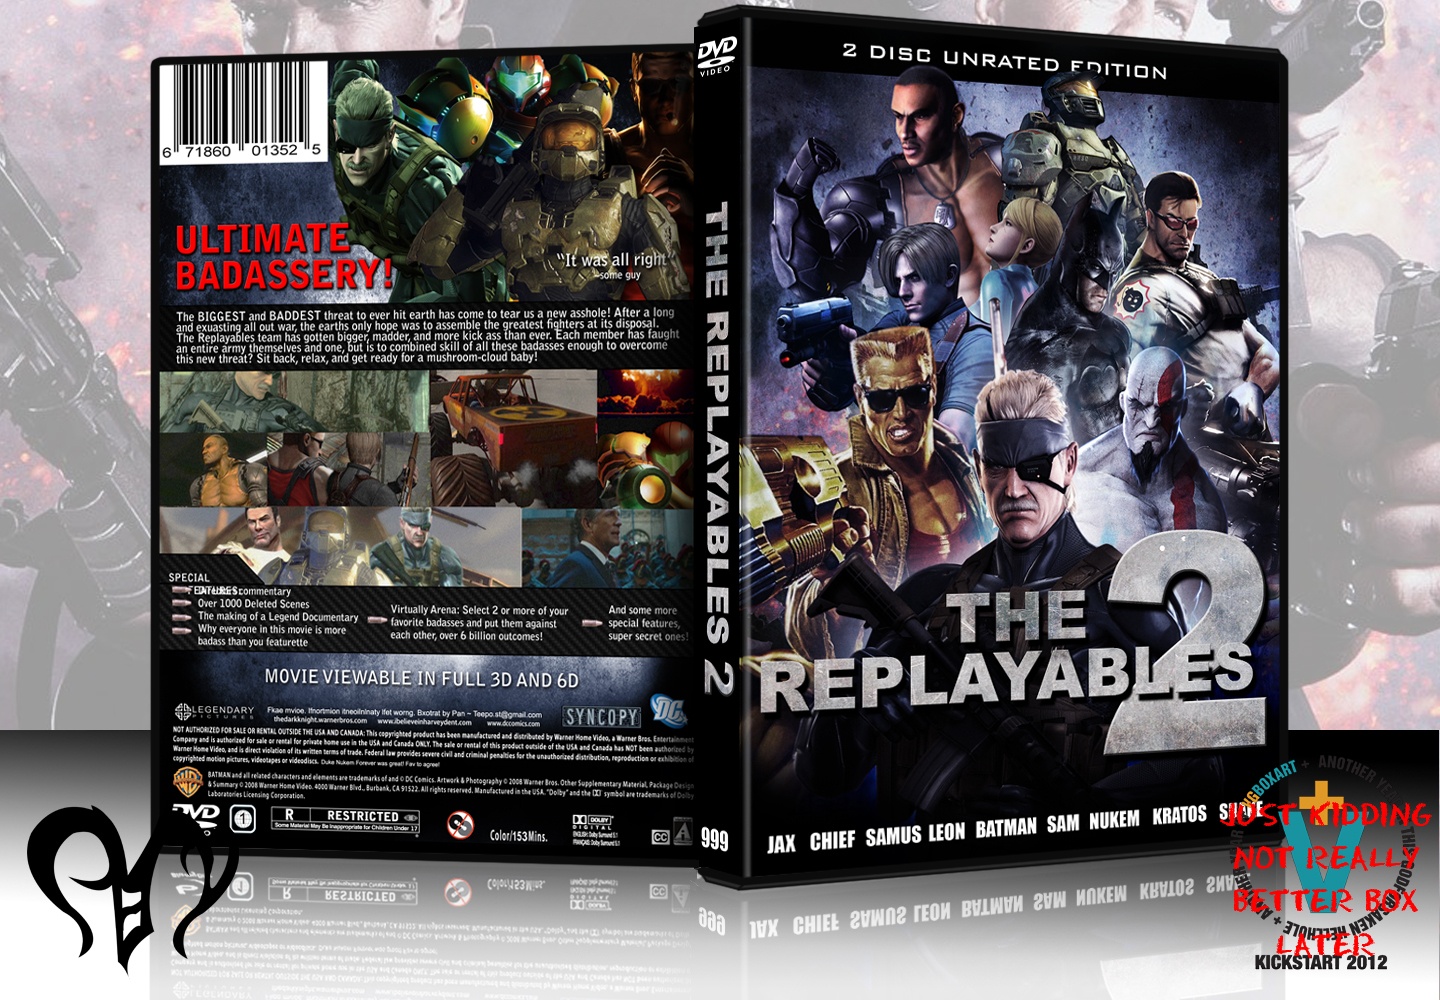 The Replayables 2 box cover